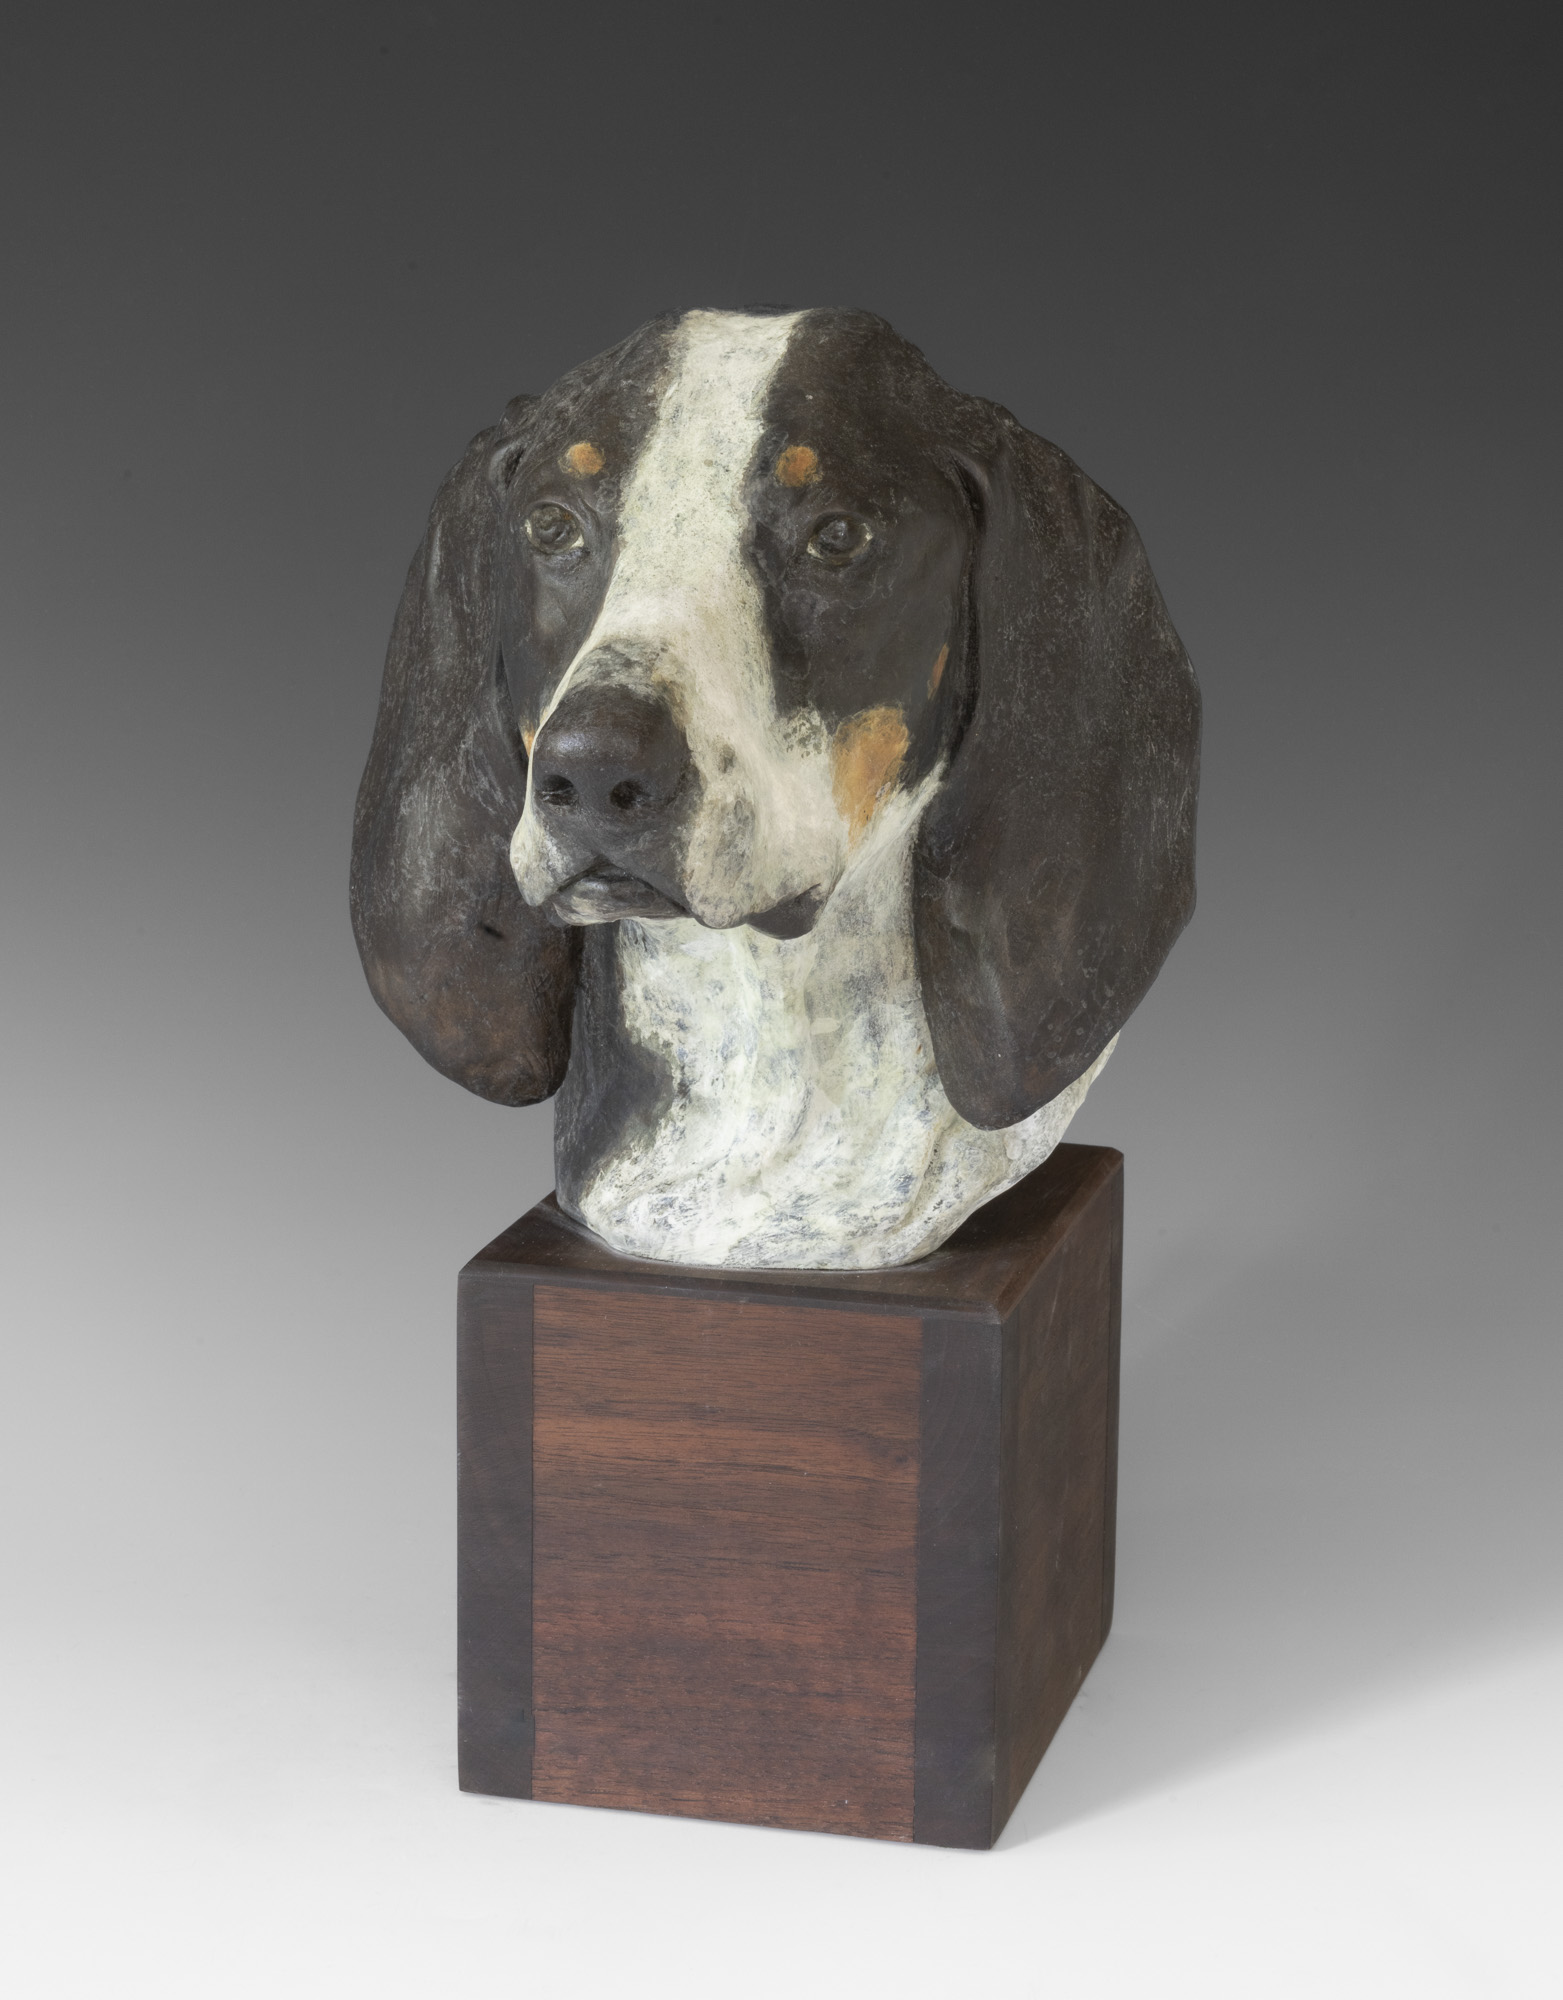 "Blue the Coon Hound"
Bronze on Wood
15 x 9.5 x 15